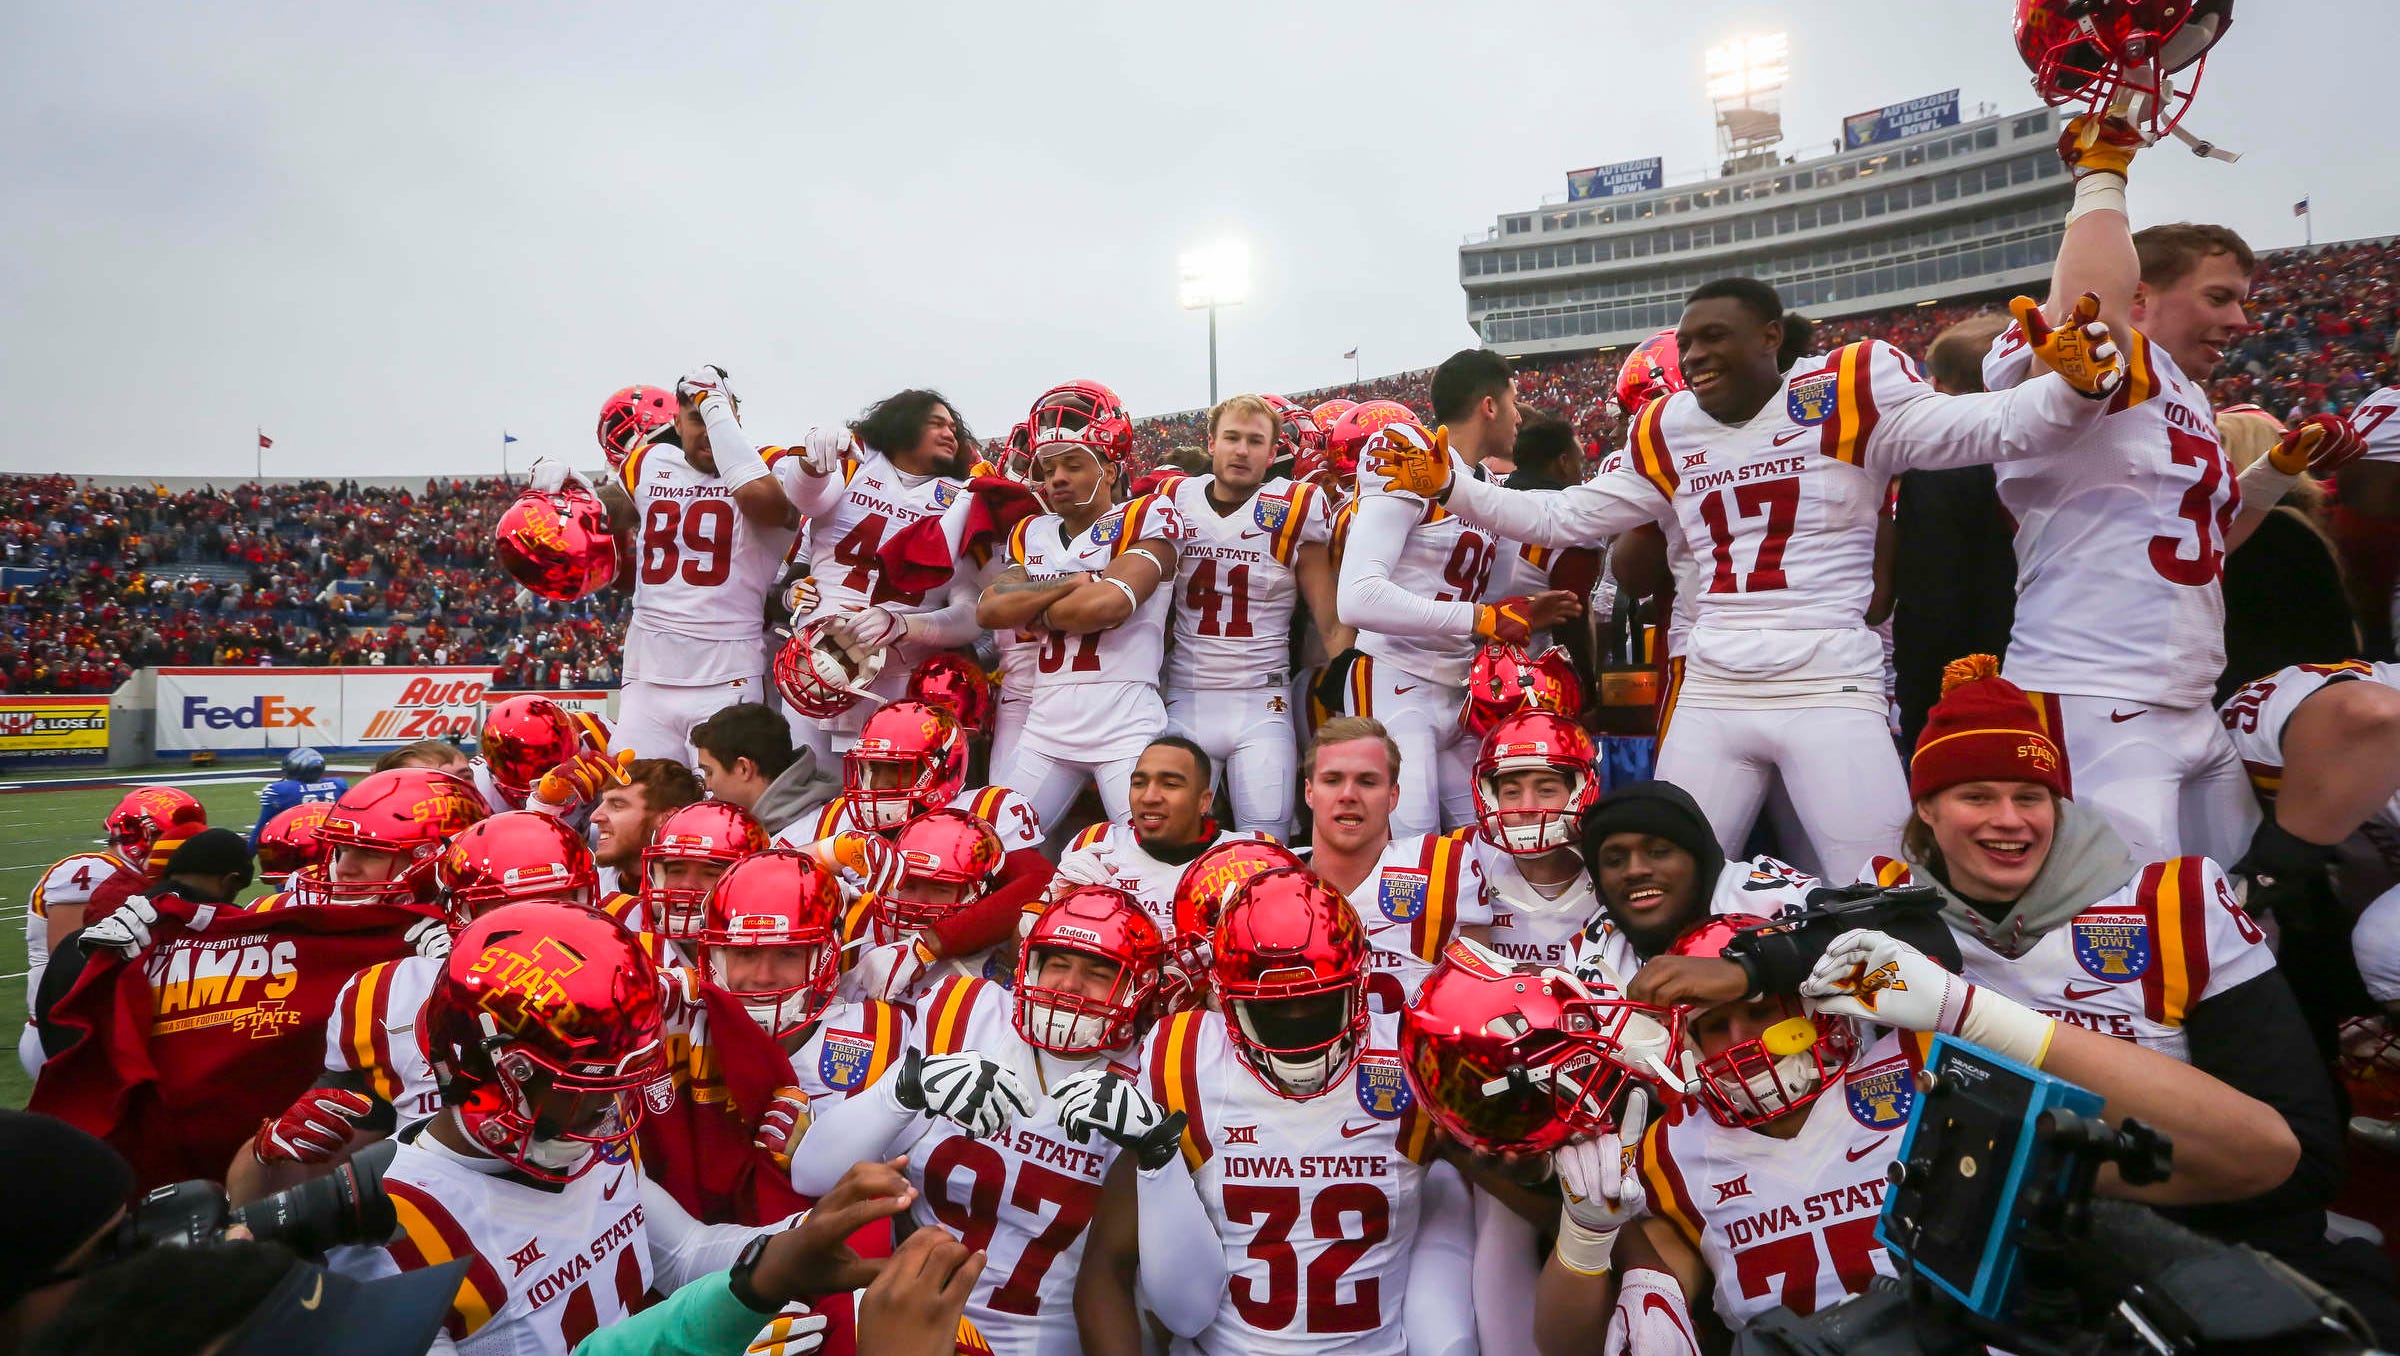 WATCH Liberty Bowl stage collapses as Iowa State celebrates victory